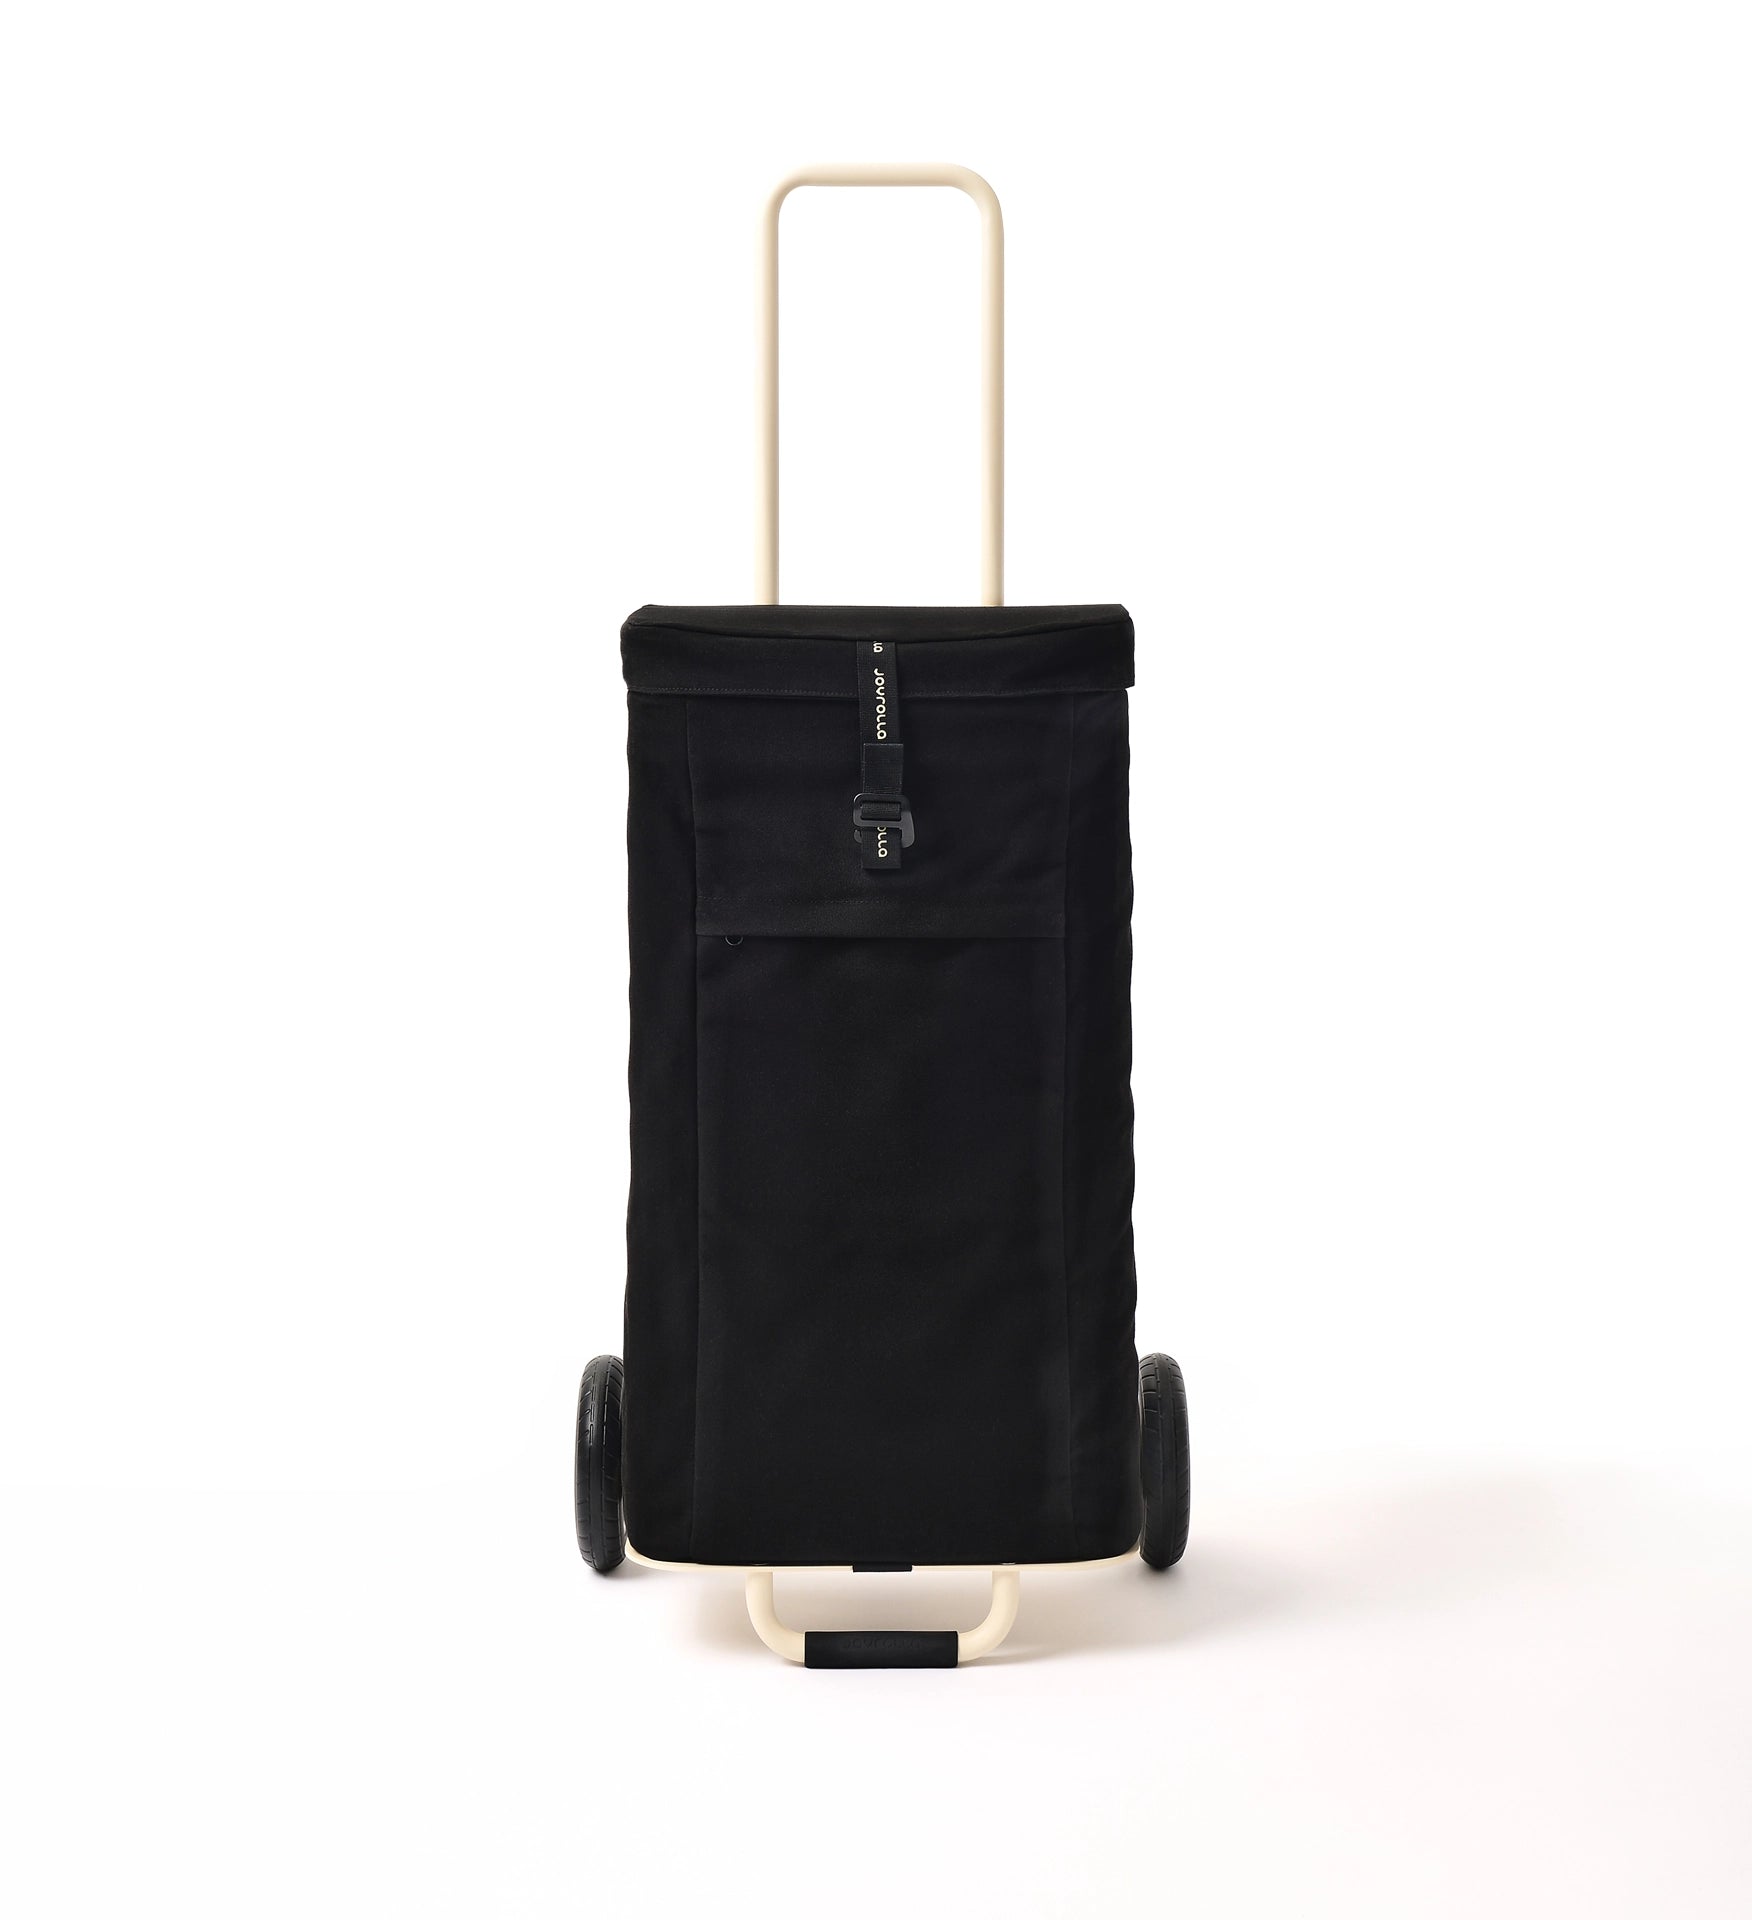 A sleek, black Joyrolla cart designed for effortless transportation. The cart features a sturdy frame with smooth-rolling wheels and a collapsible design for easy storage. Its spacious platform provides ample room for carrying various items. The black color adds a touch of elegance to the cart's appearance, making it a practical and stylish solution for transporting groceries, luggage, or other heavy loads.